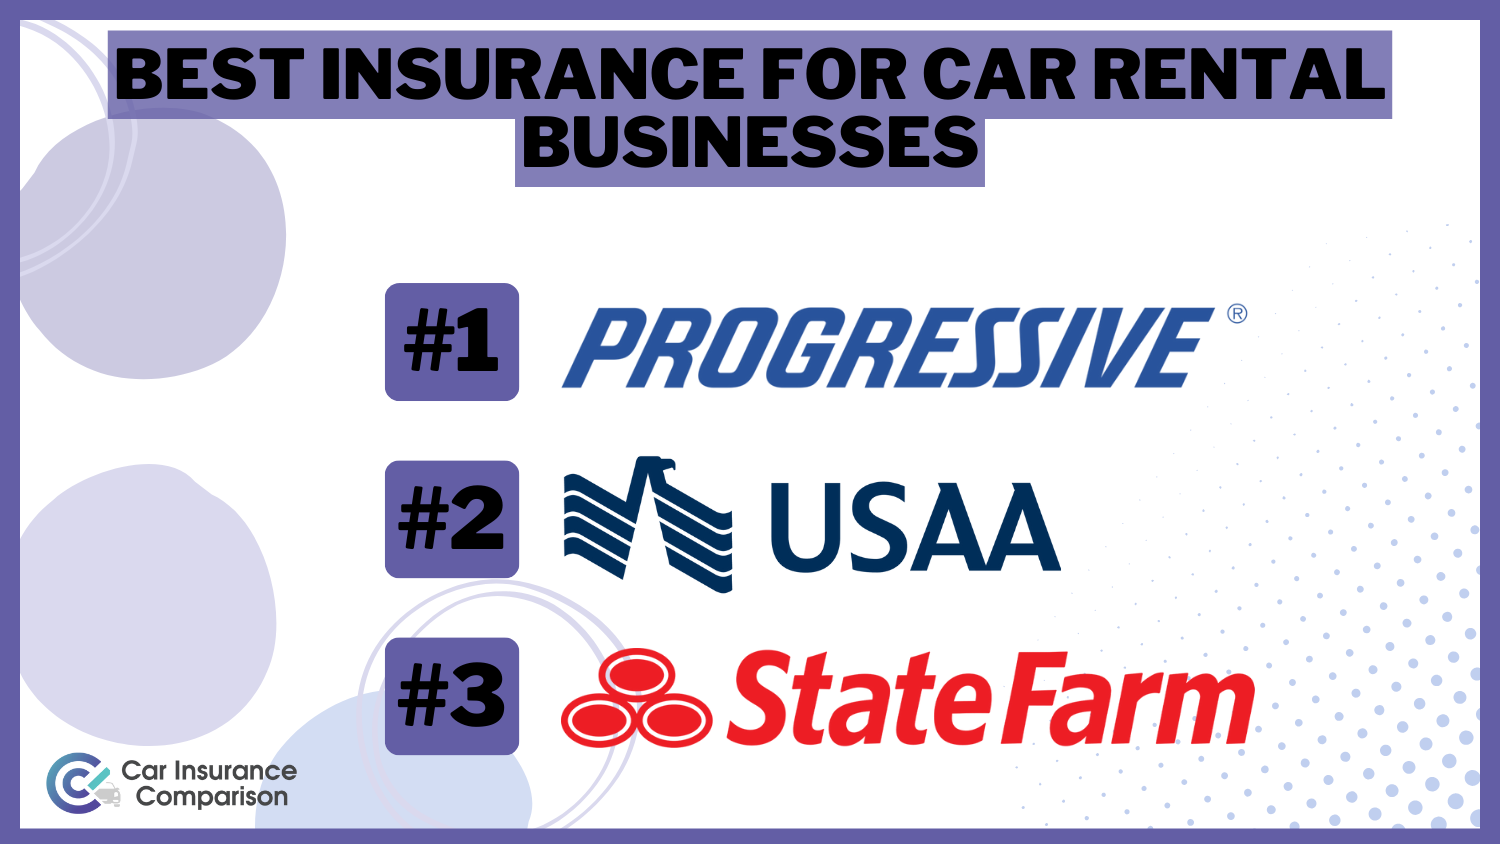 Progressive, USAA, and State Farm: Best Insurance for Car Rental Businesses